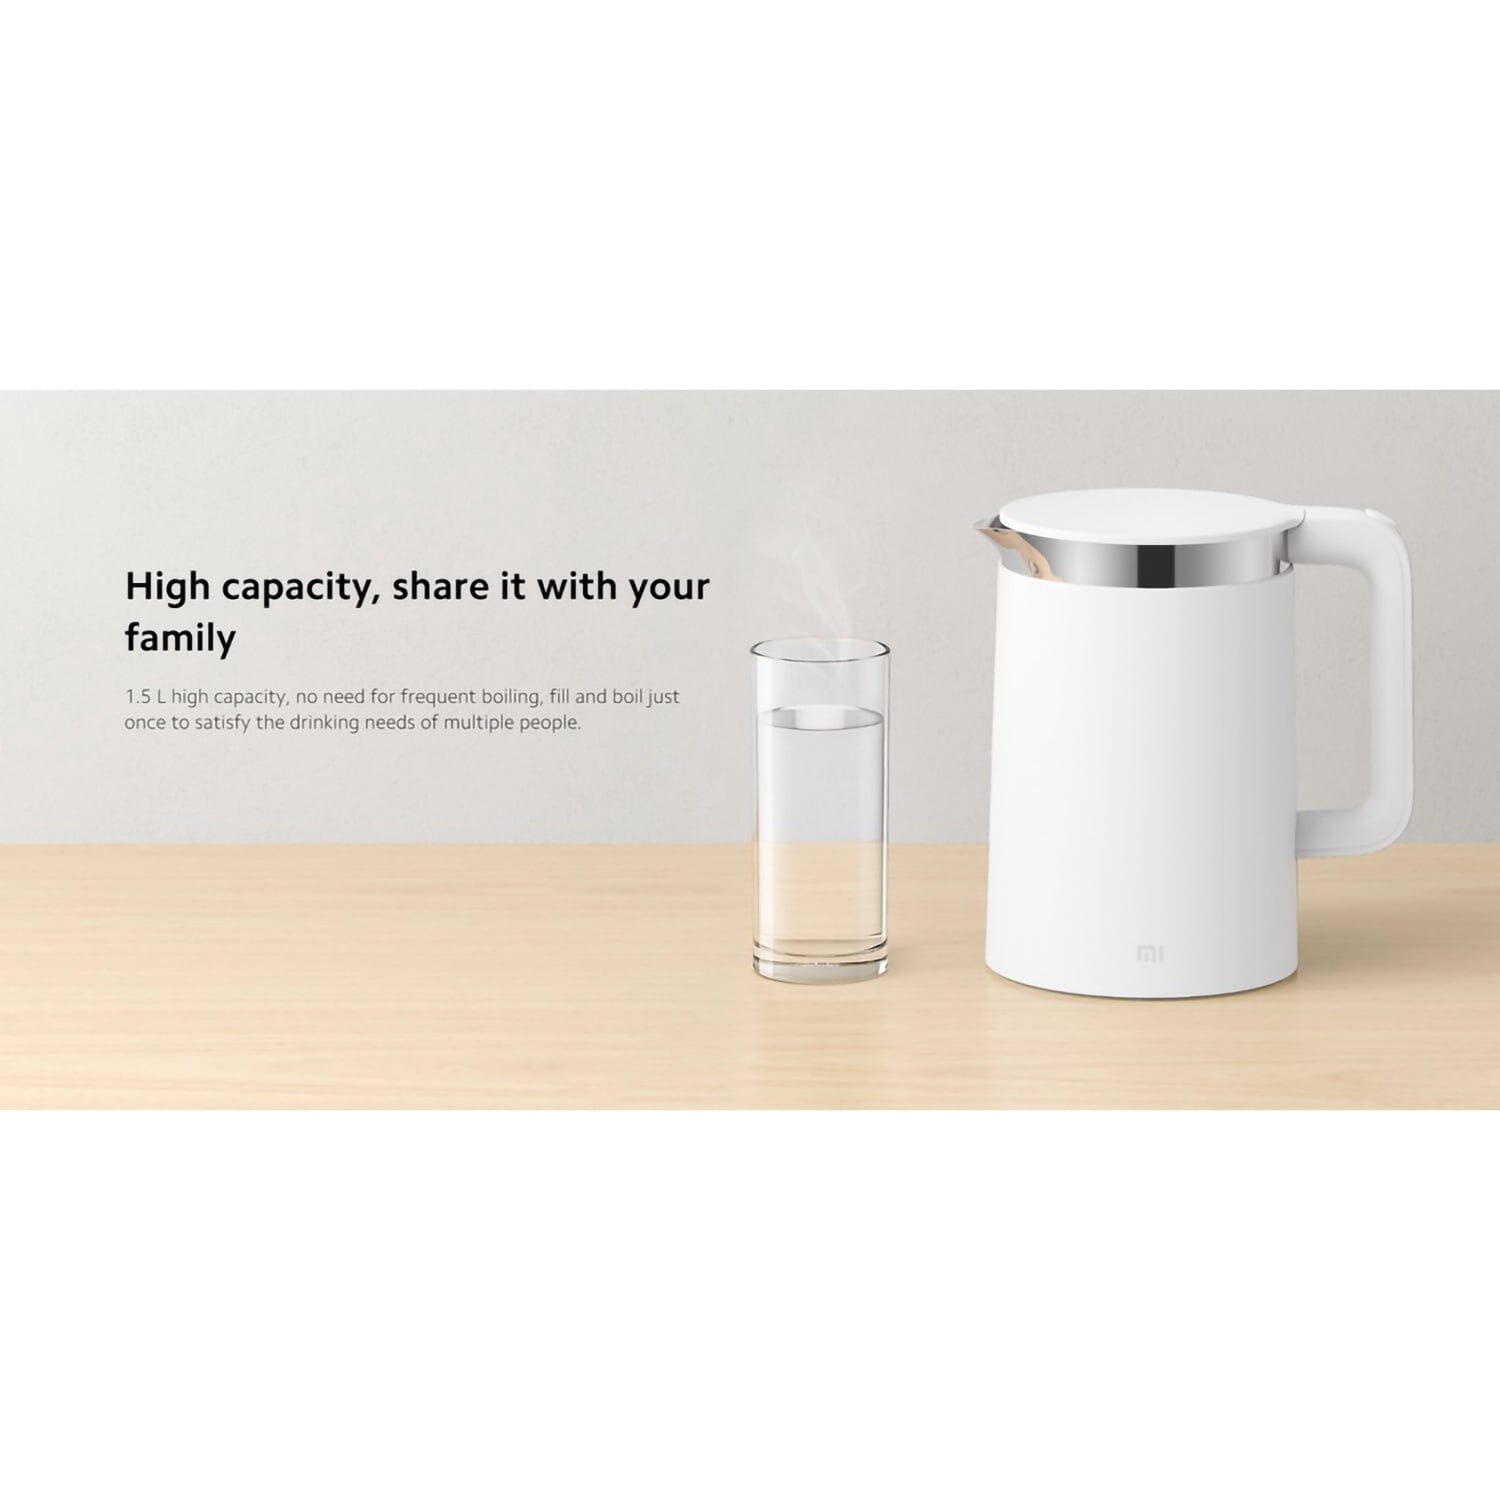 Xiaomi Mi Smart Electric Kettle Pro 1800W Fast Boiling 1.5L Stainless Steel with LED Digital Screen and App Control via Bluetooth [Local Official Warranty] Xiaomi 